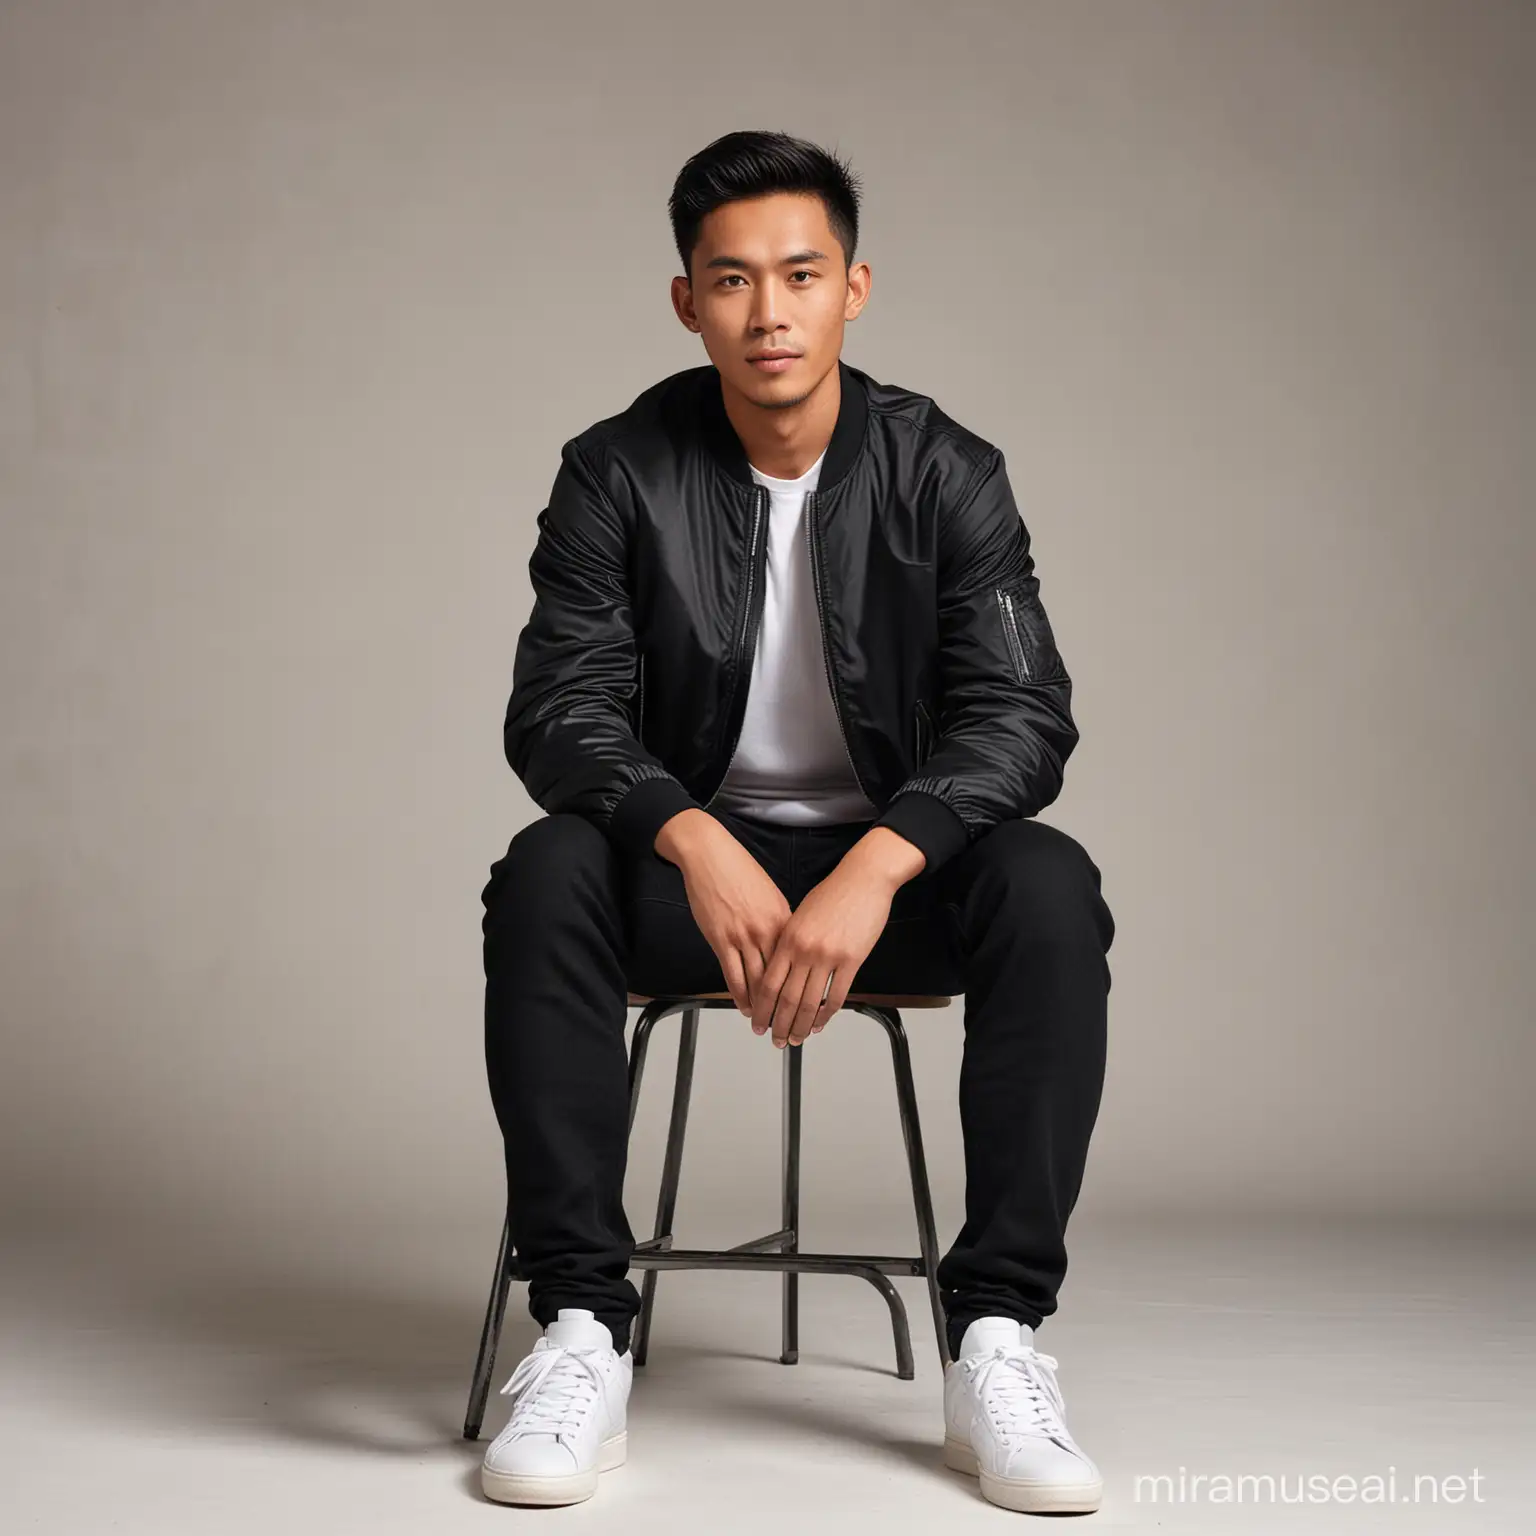 Indonesian Man in Stylish Black Bomber Jacket and Jeans Sitting on Chair